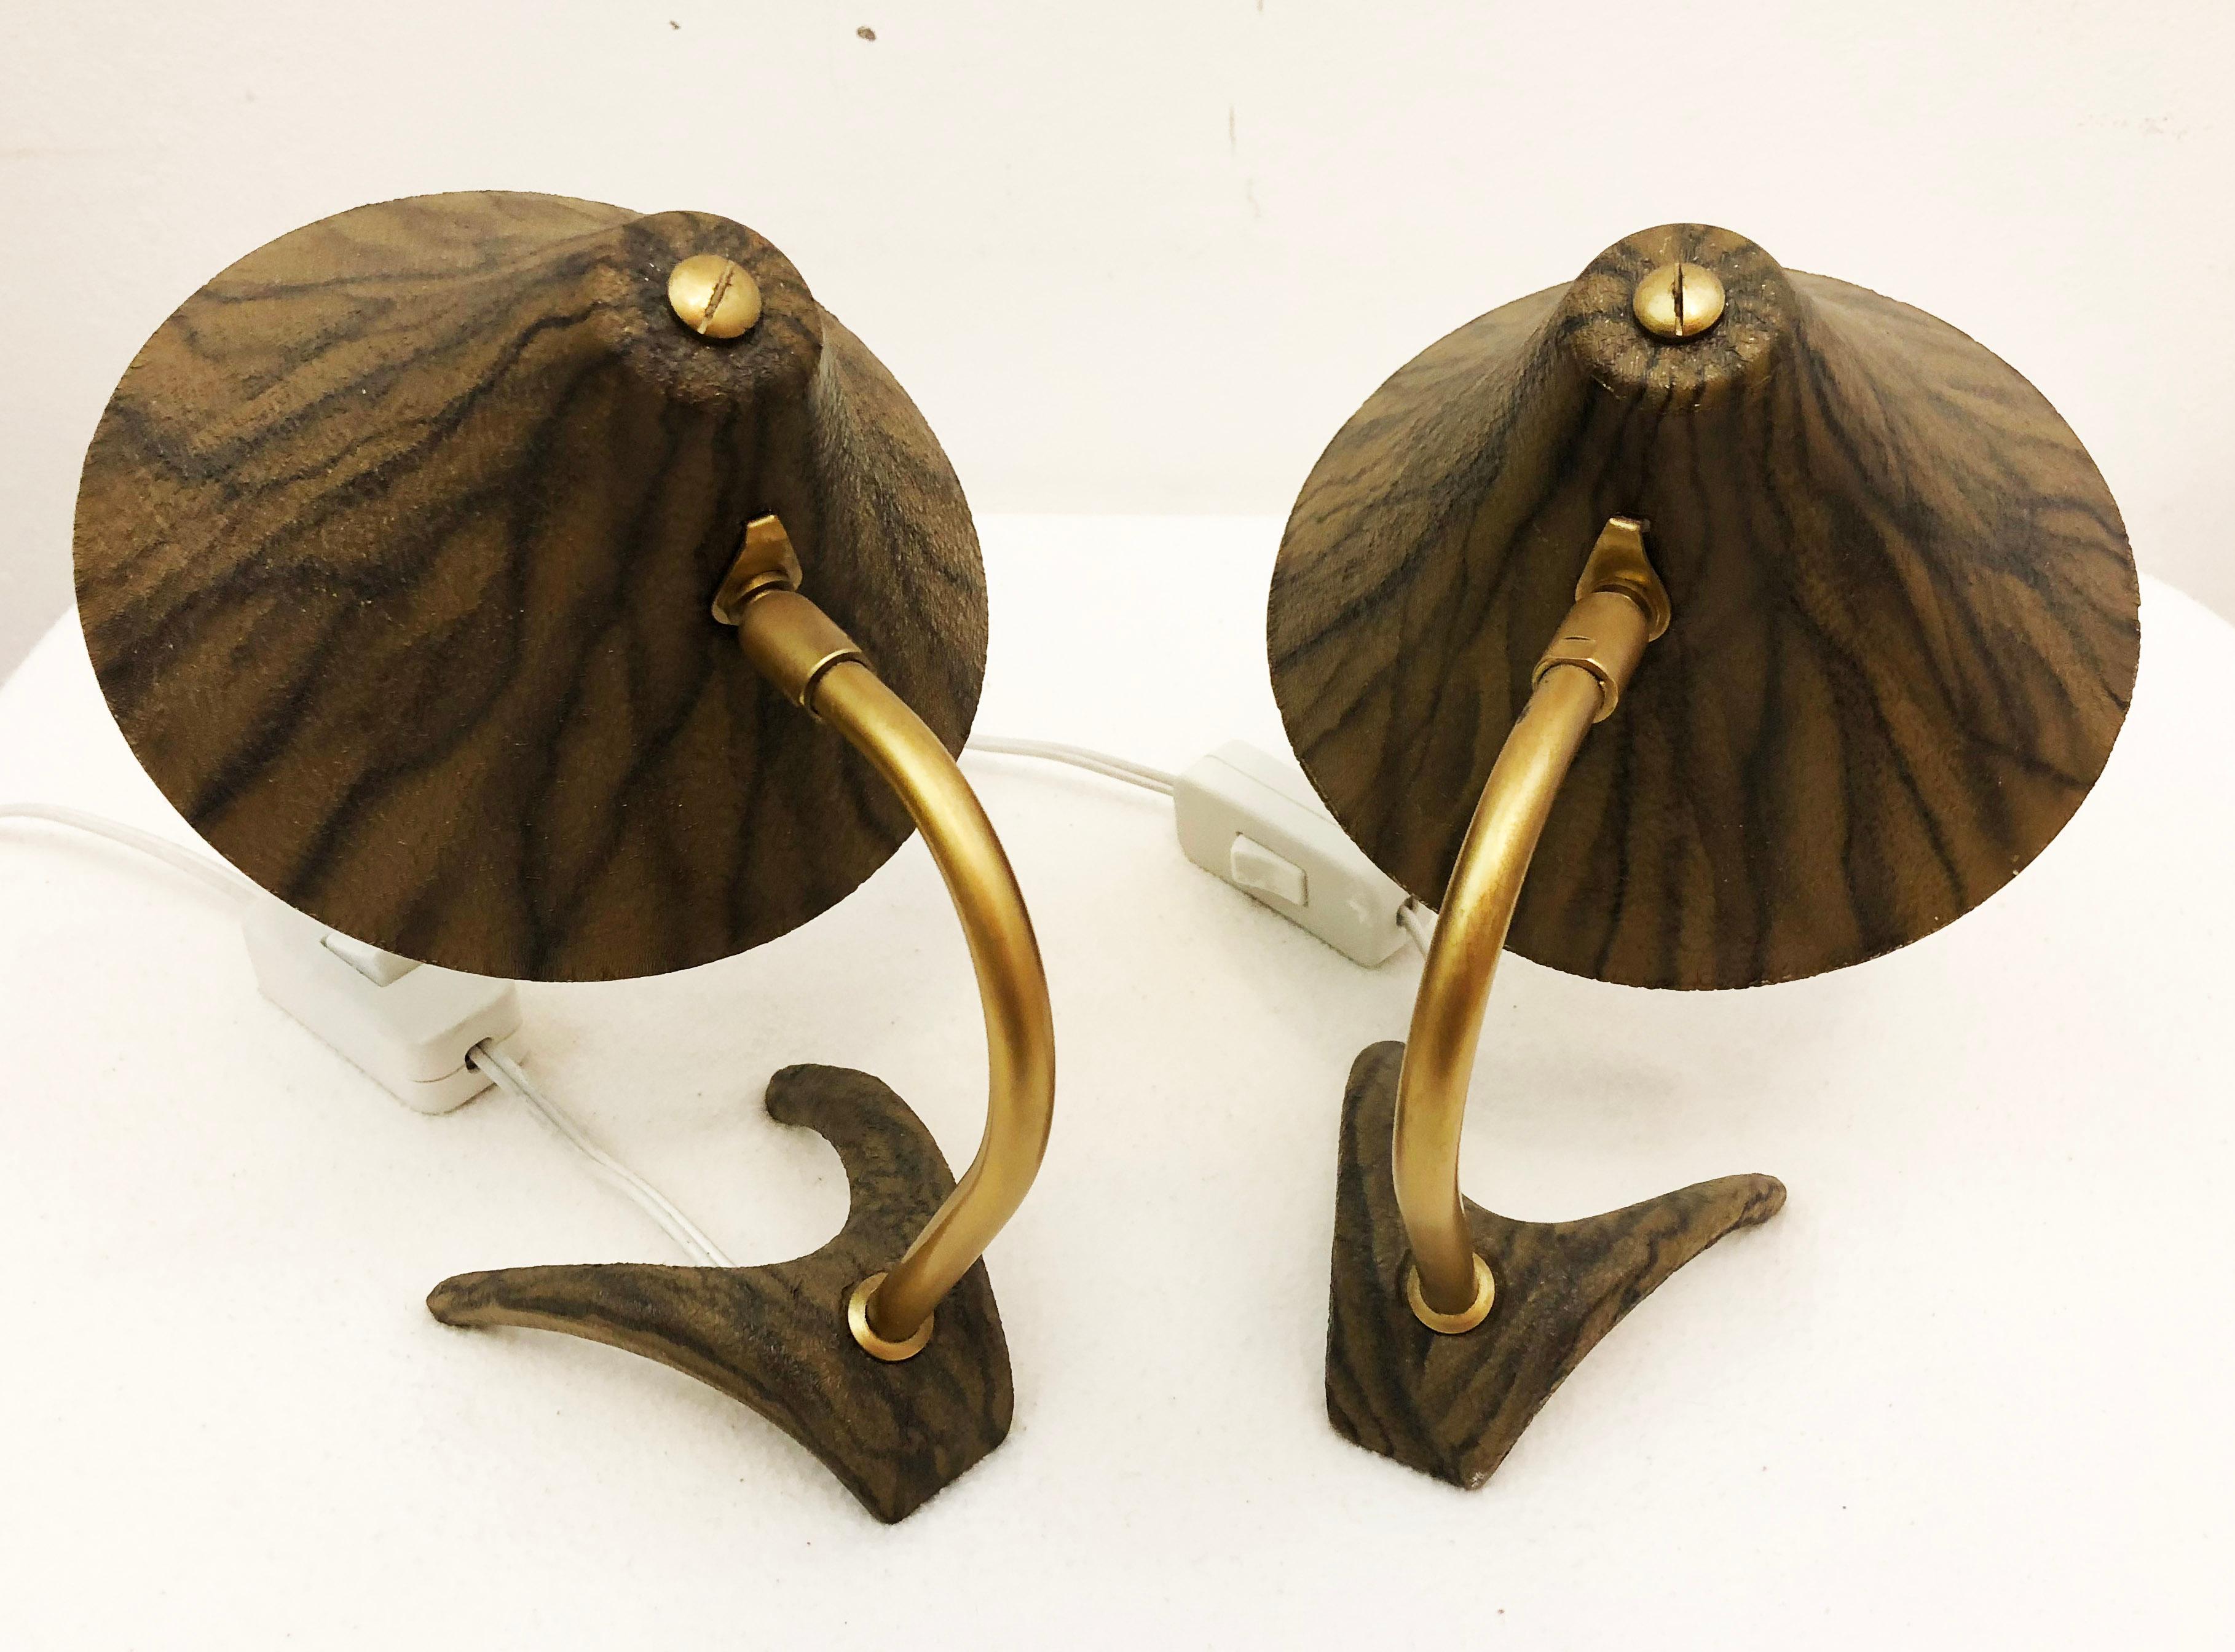 Dutch table lamp designed by Louis Kalff, 1950s.
Original condition.
Price for a pair.